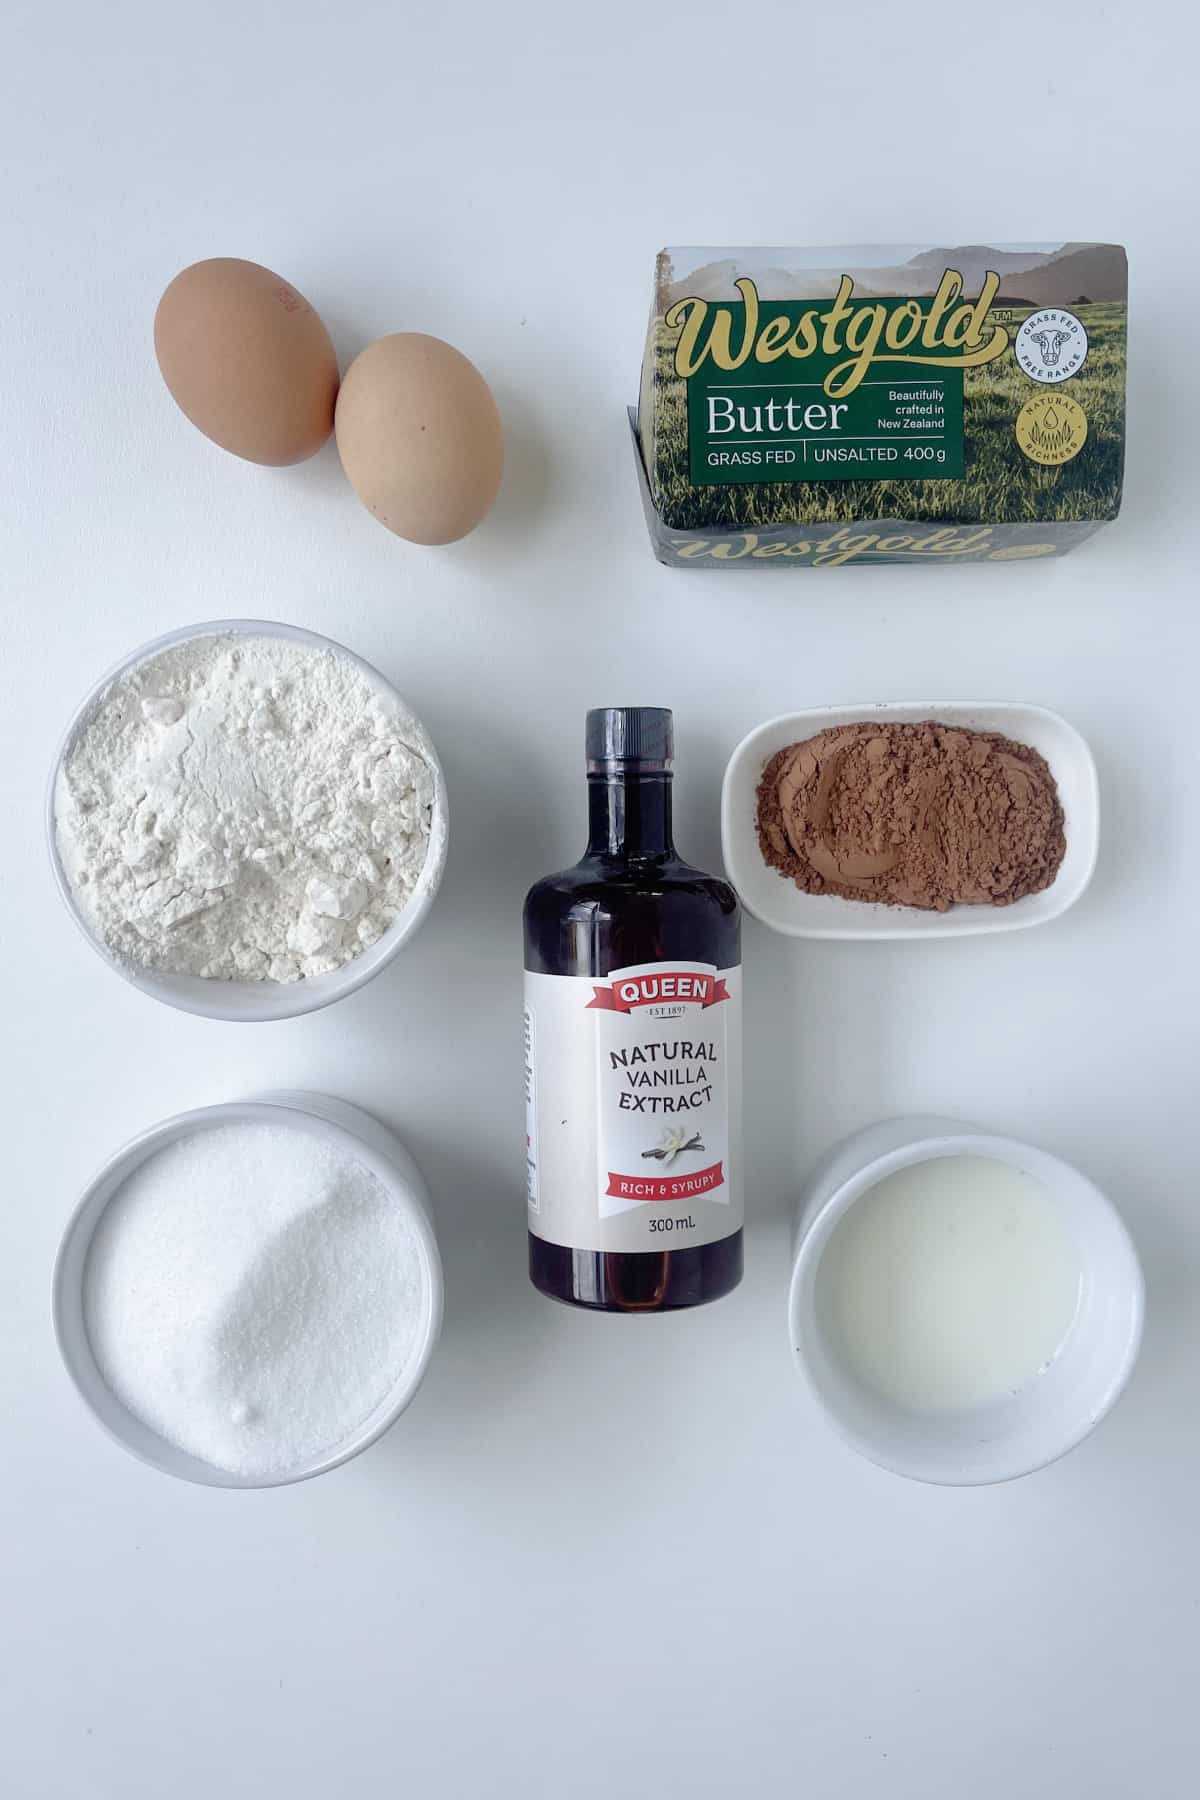 Ingredients to make a chocolate cake in a thermomix on a white bench top.